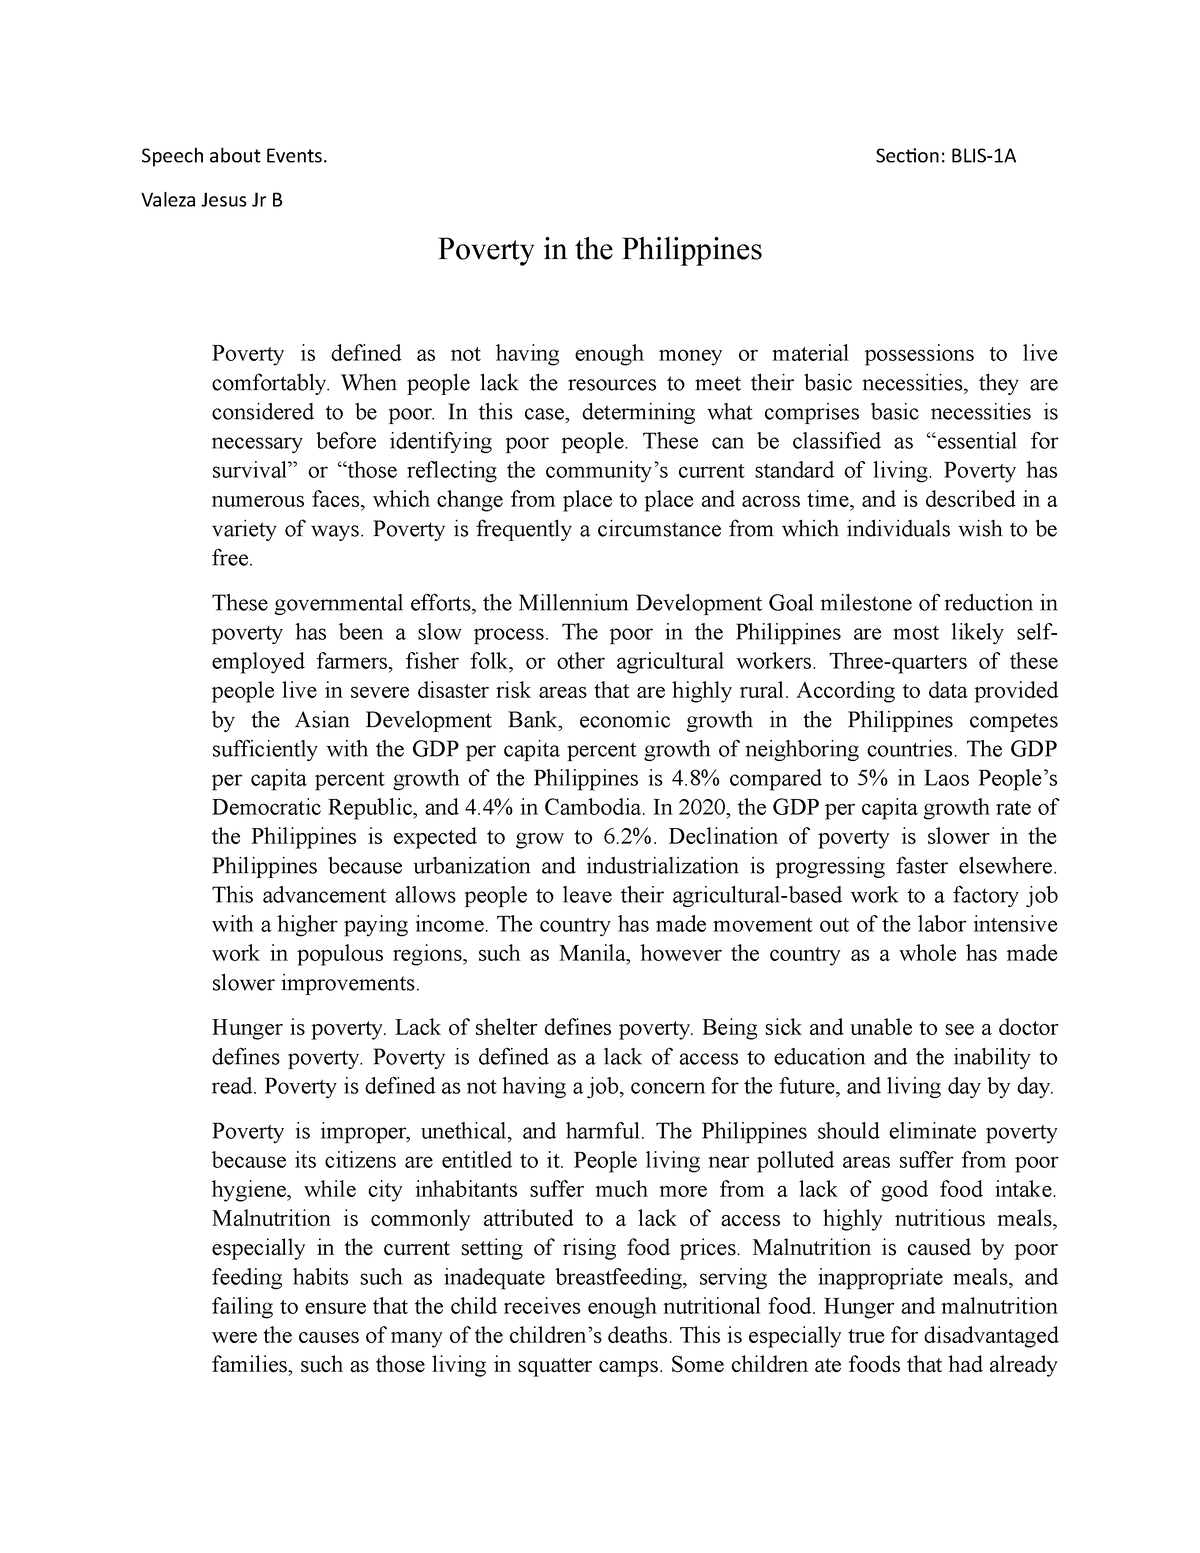 argumentative essay about poverty in the philippines